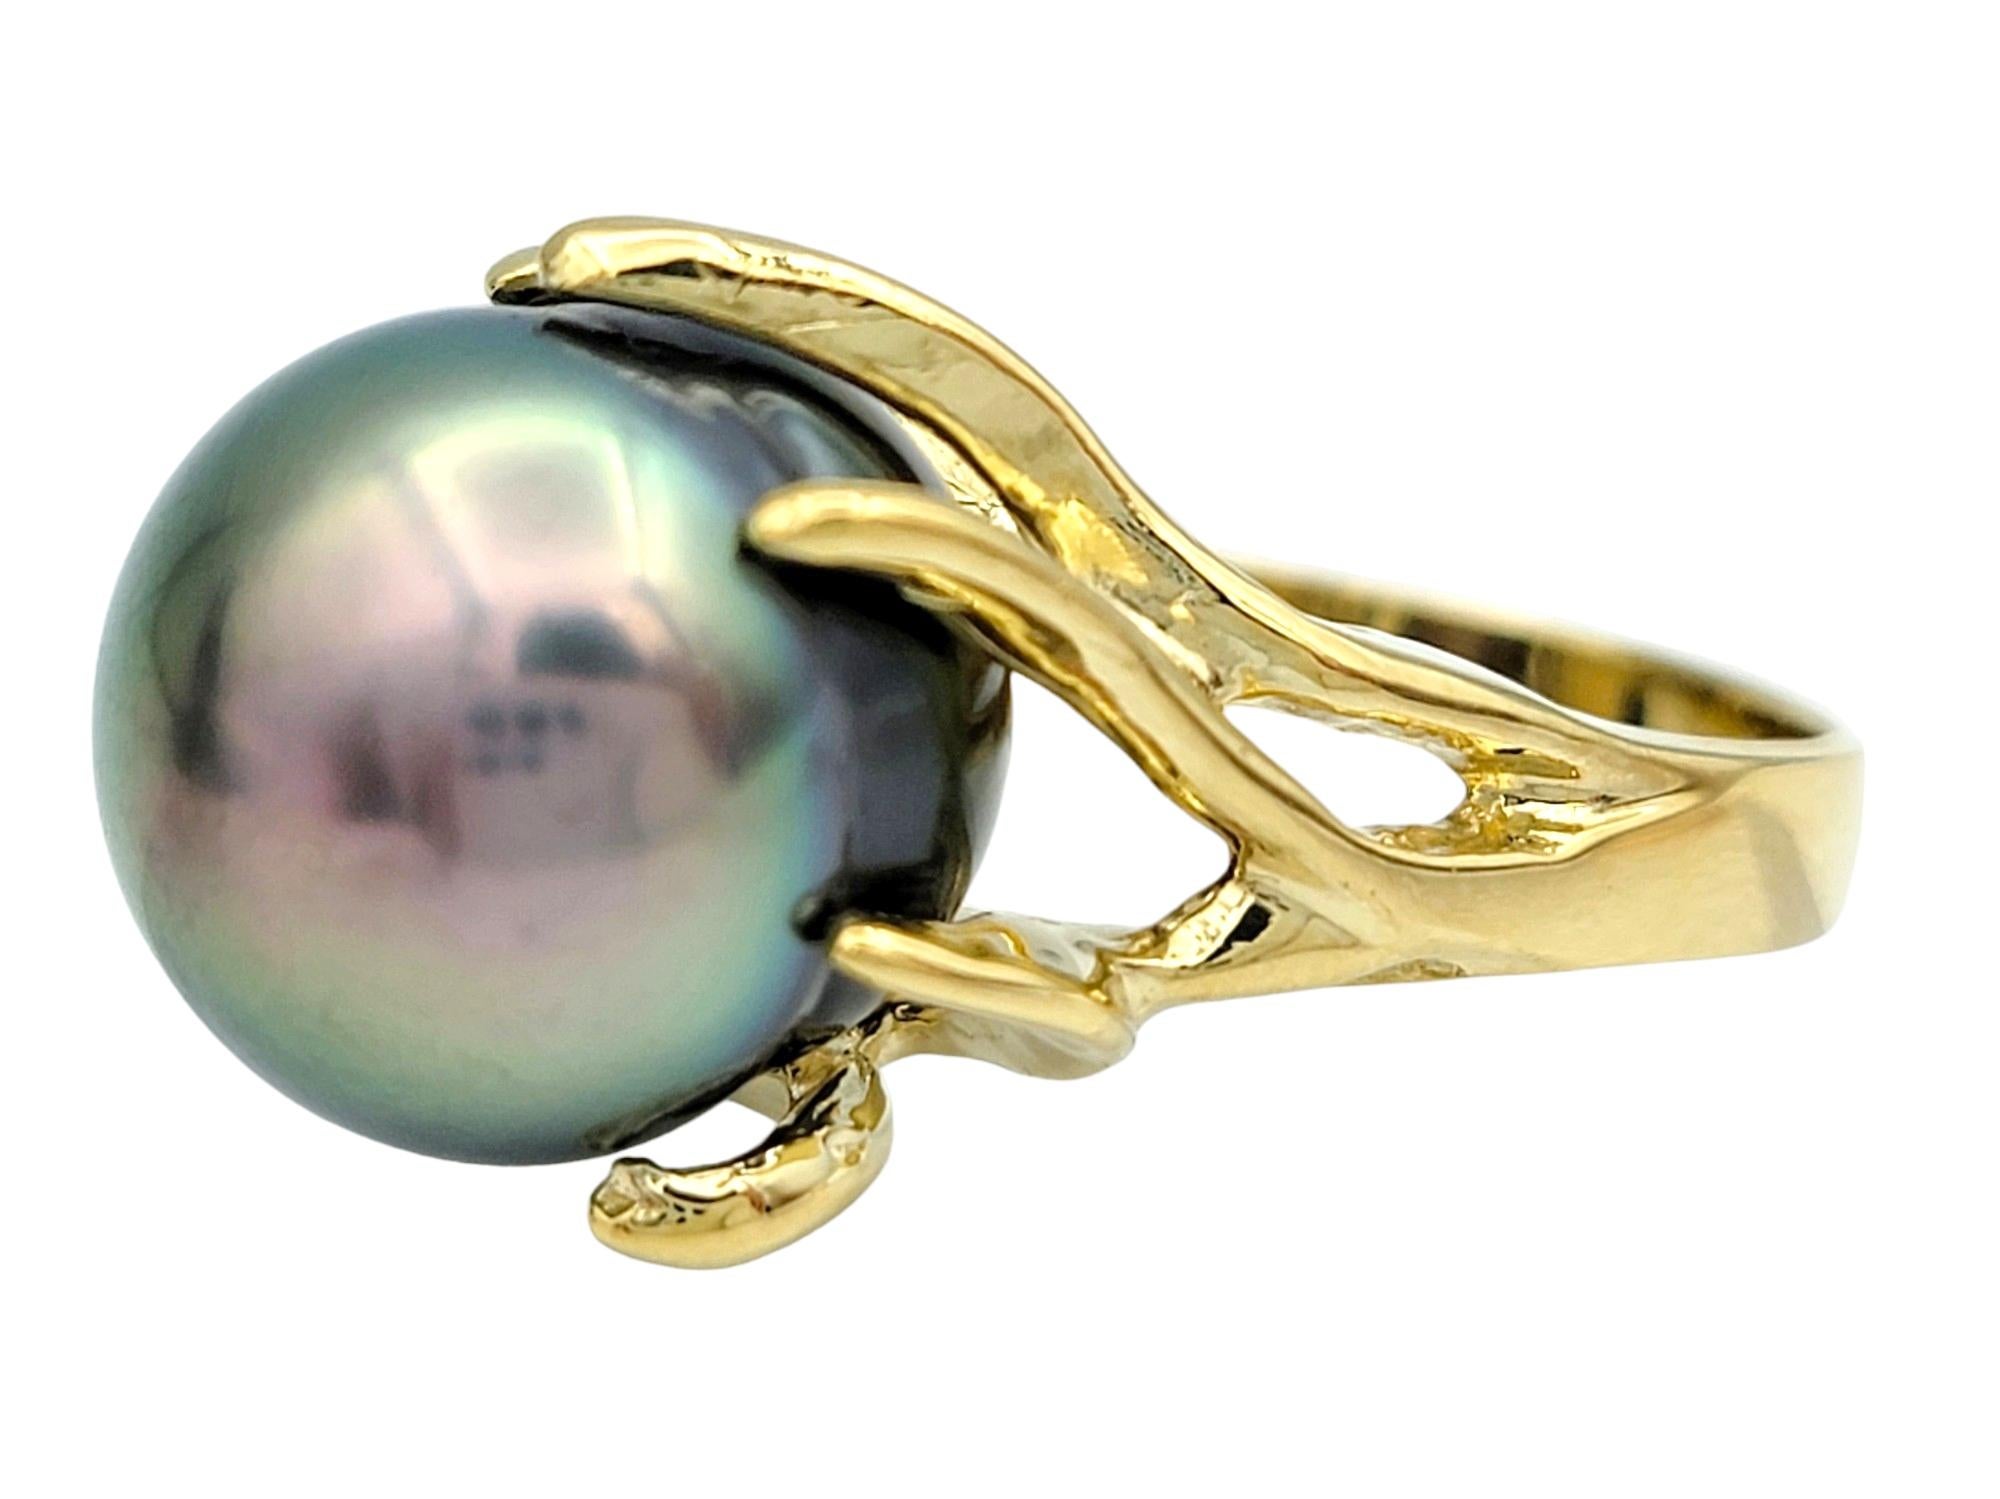 Cabochon Black Tahitian South Sea Pearl High Profile 14 Karat Yellow Gold Cocktail Ring For Sale